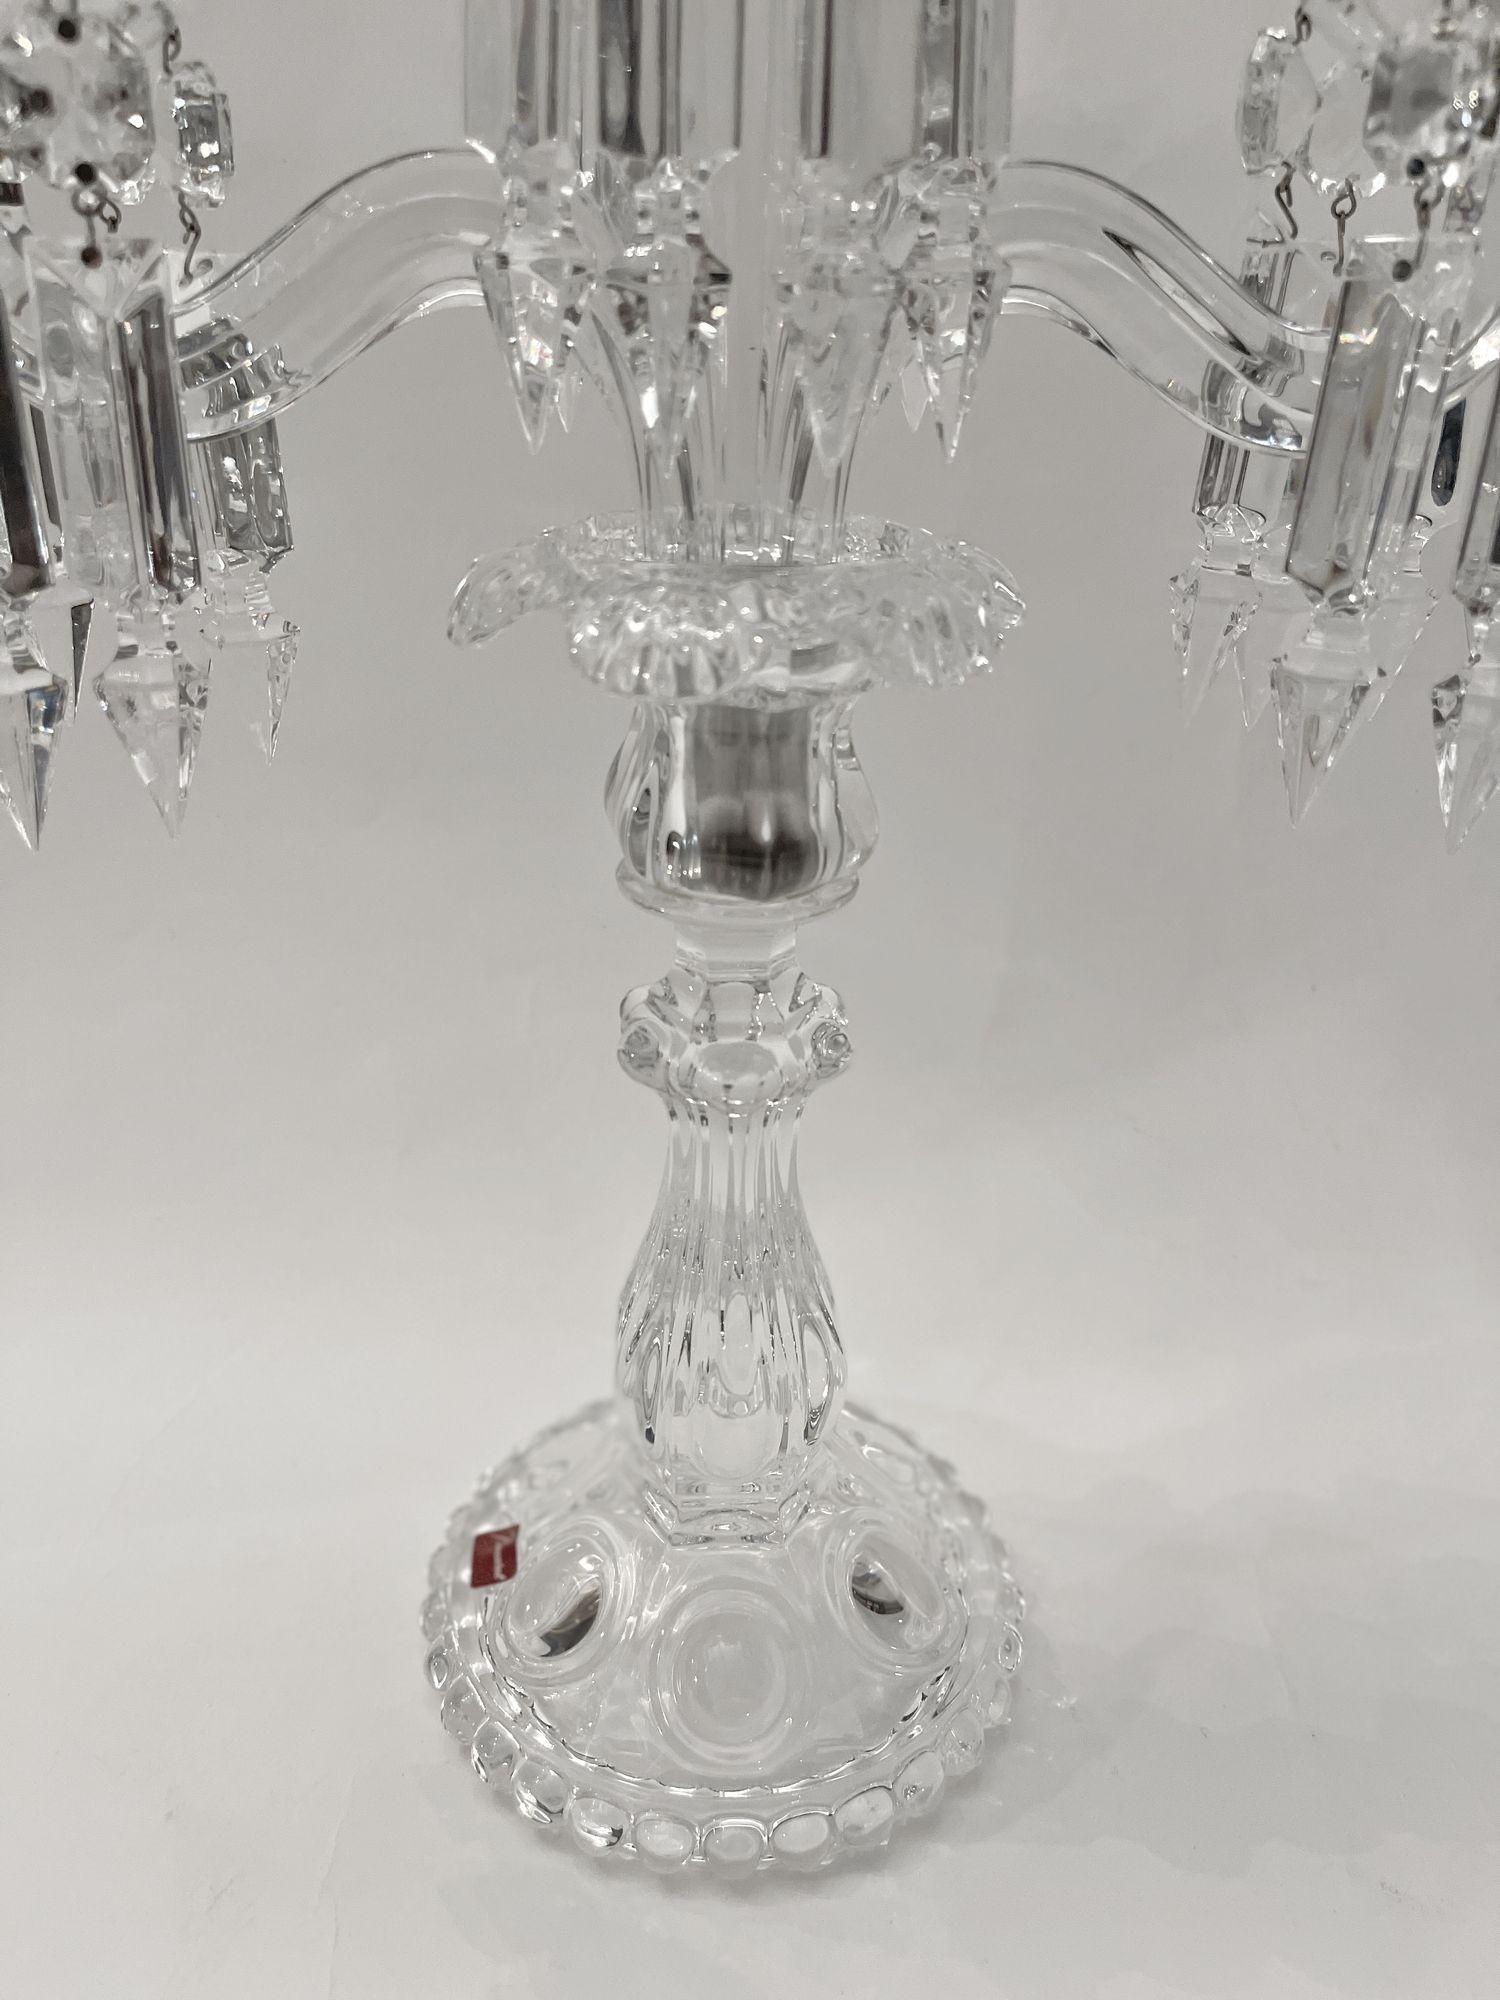 French Pair of Mid-Century Modern Neoclassical Glass Obelisk Candelabras by Baccarat